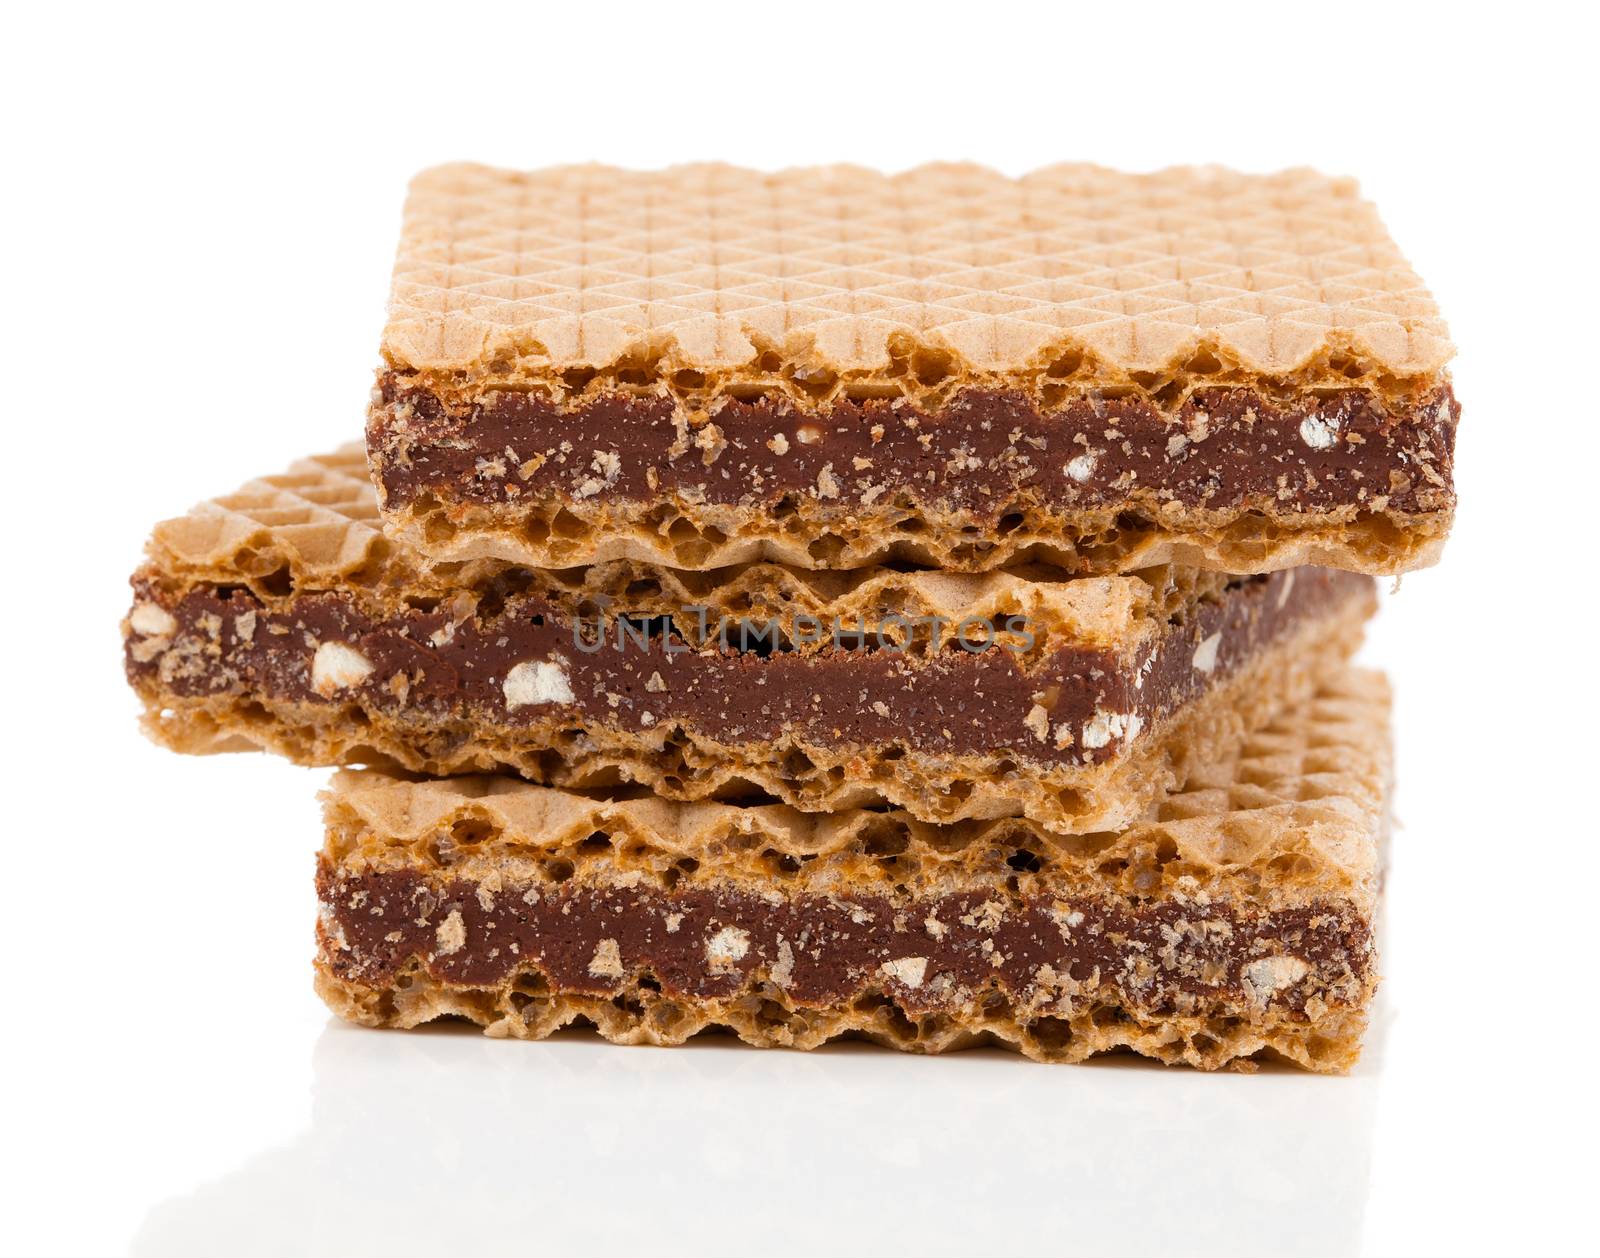 Wafers with chocolate on a white background by motorolka